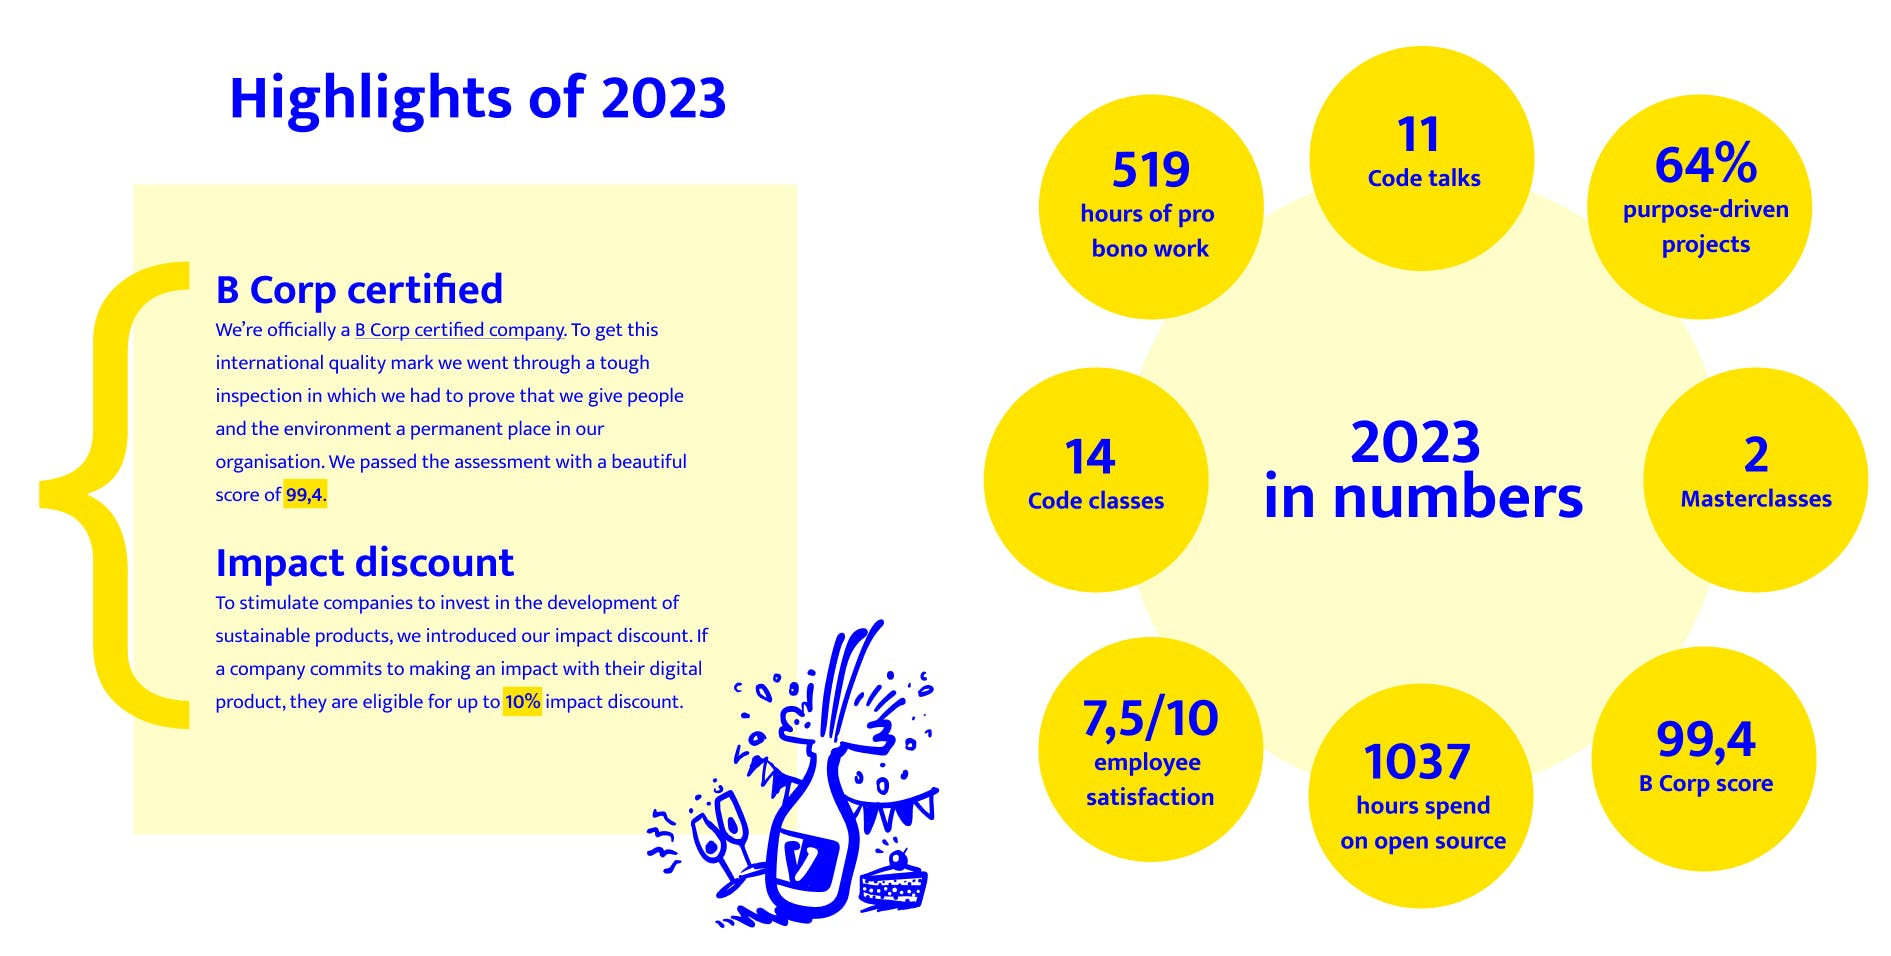 2023 in numbers: 11 code talks, 64% purpose-driven projects, 2 masterclasses, 99,4 B Corp score, 1037 hours spend on open source, 7,5/10 employee statisfaction, 14 code classes, 519 hours of pro bono work